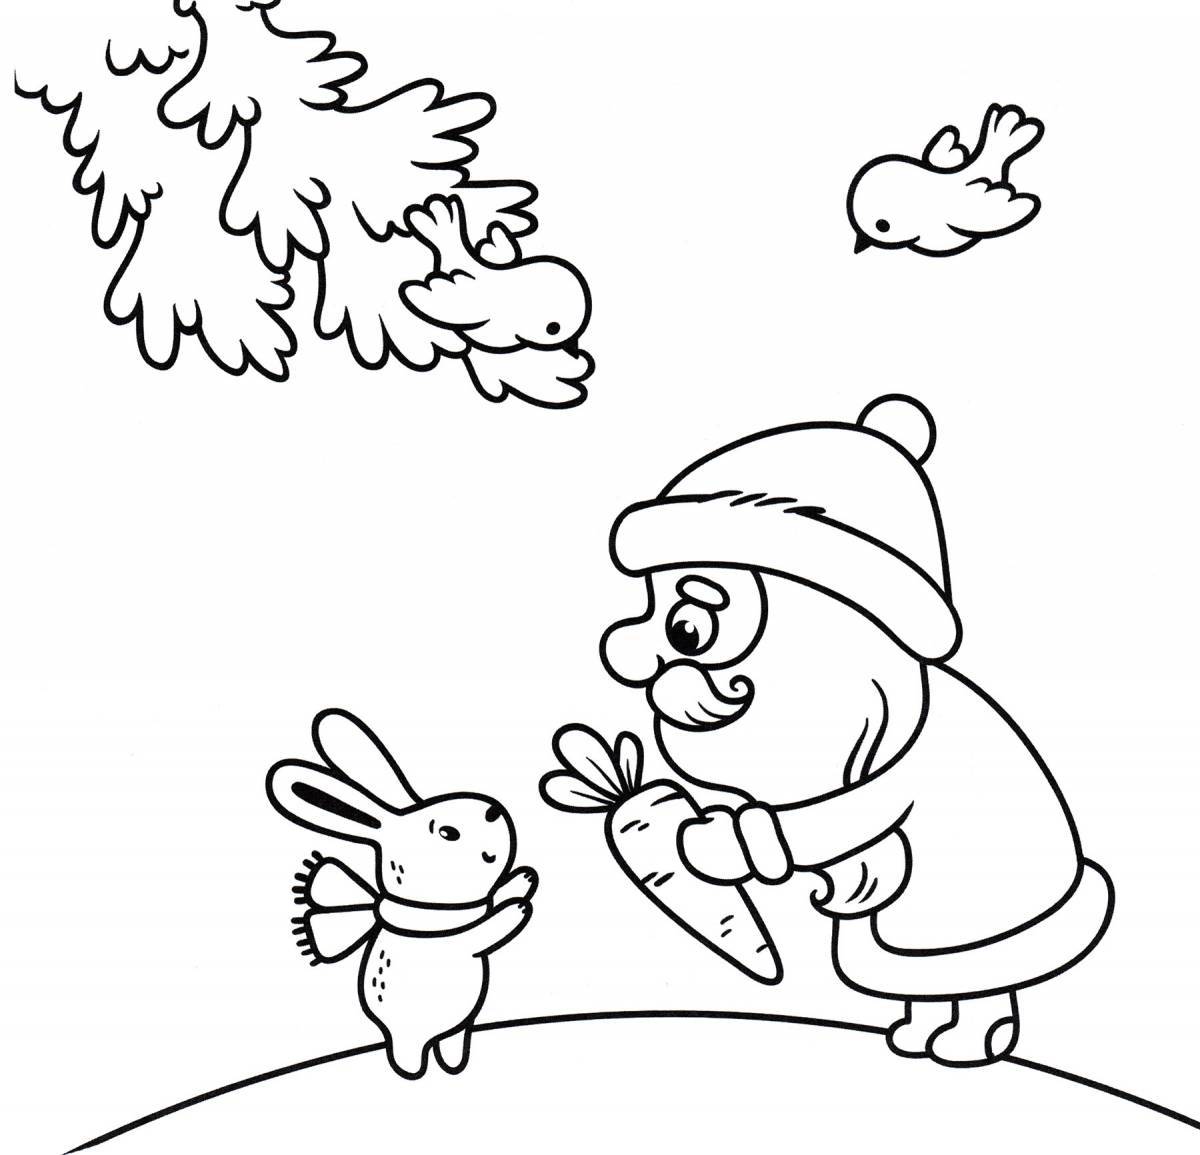 Christmas bunny colorful coloring book